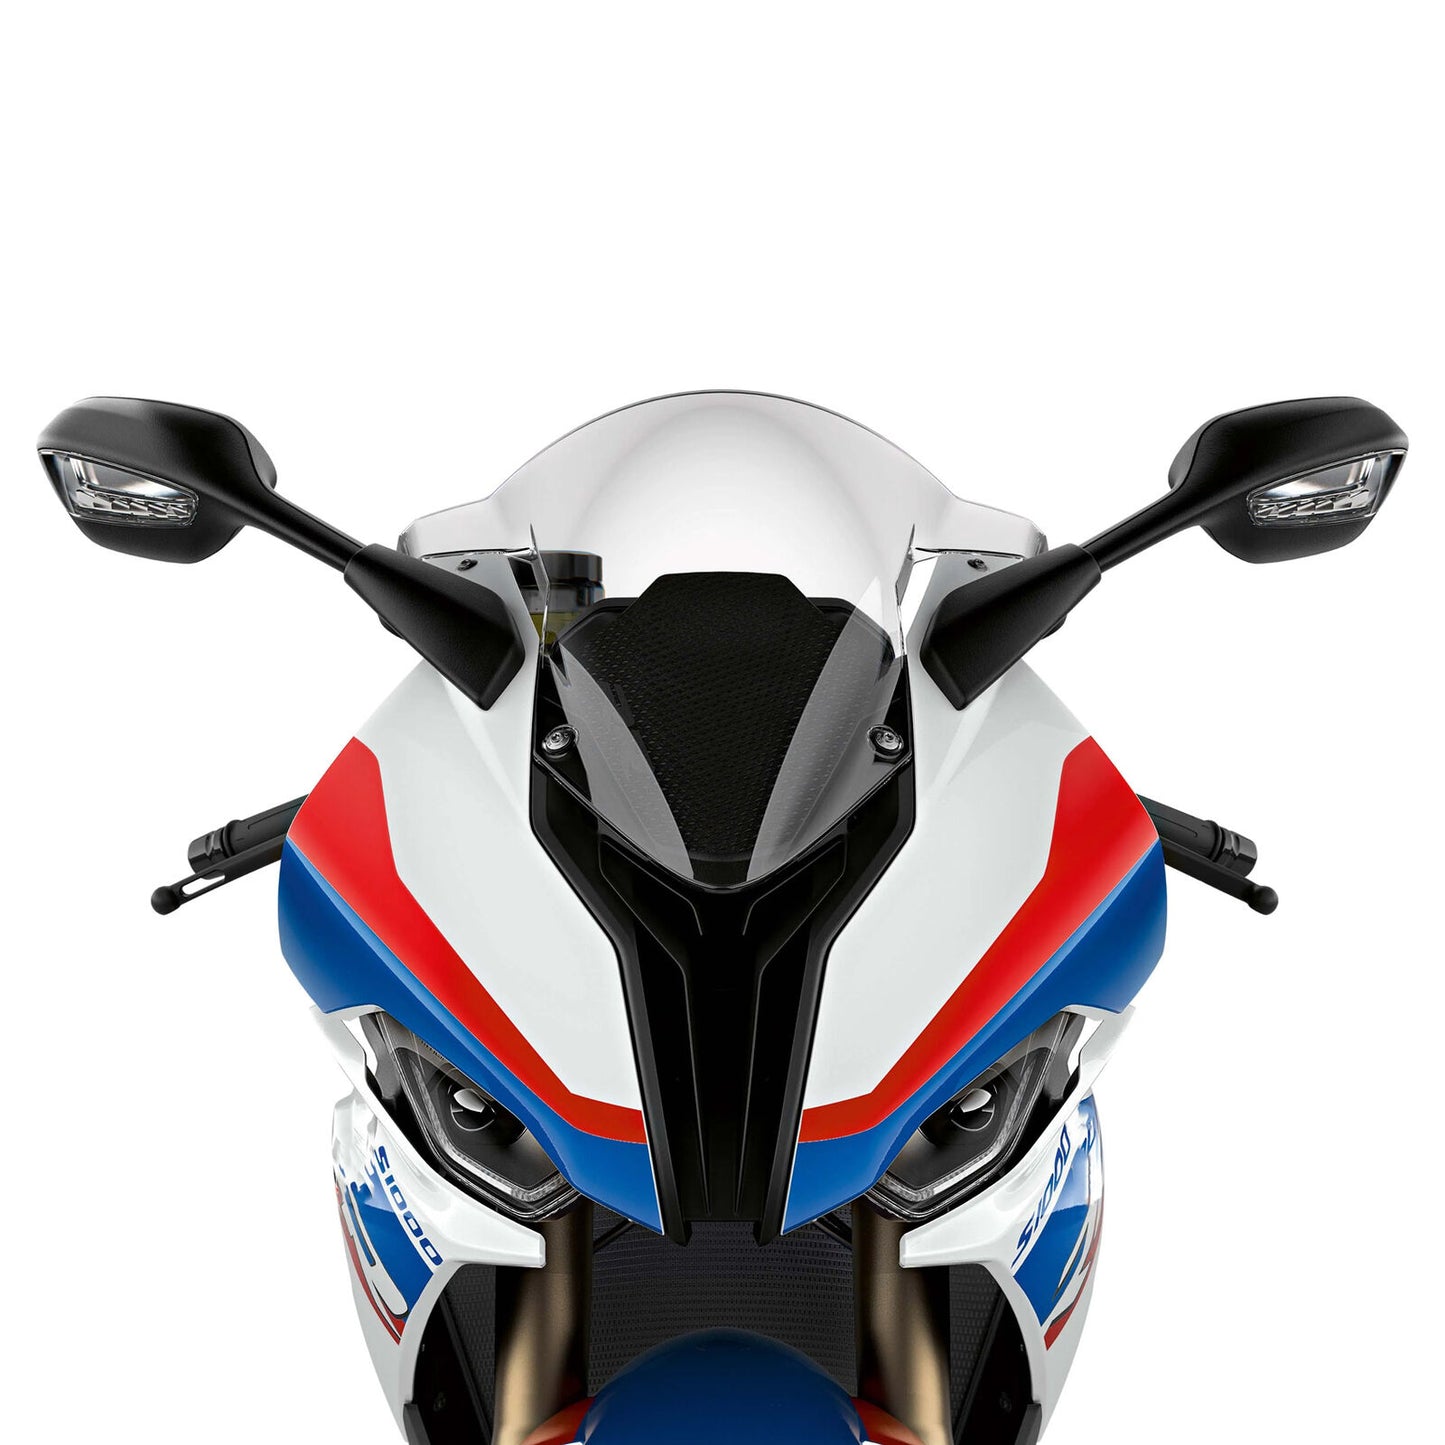 BMW S1000RR Mirrors Co: 436